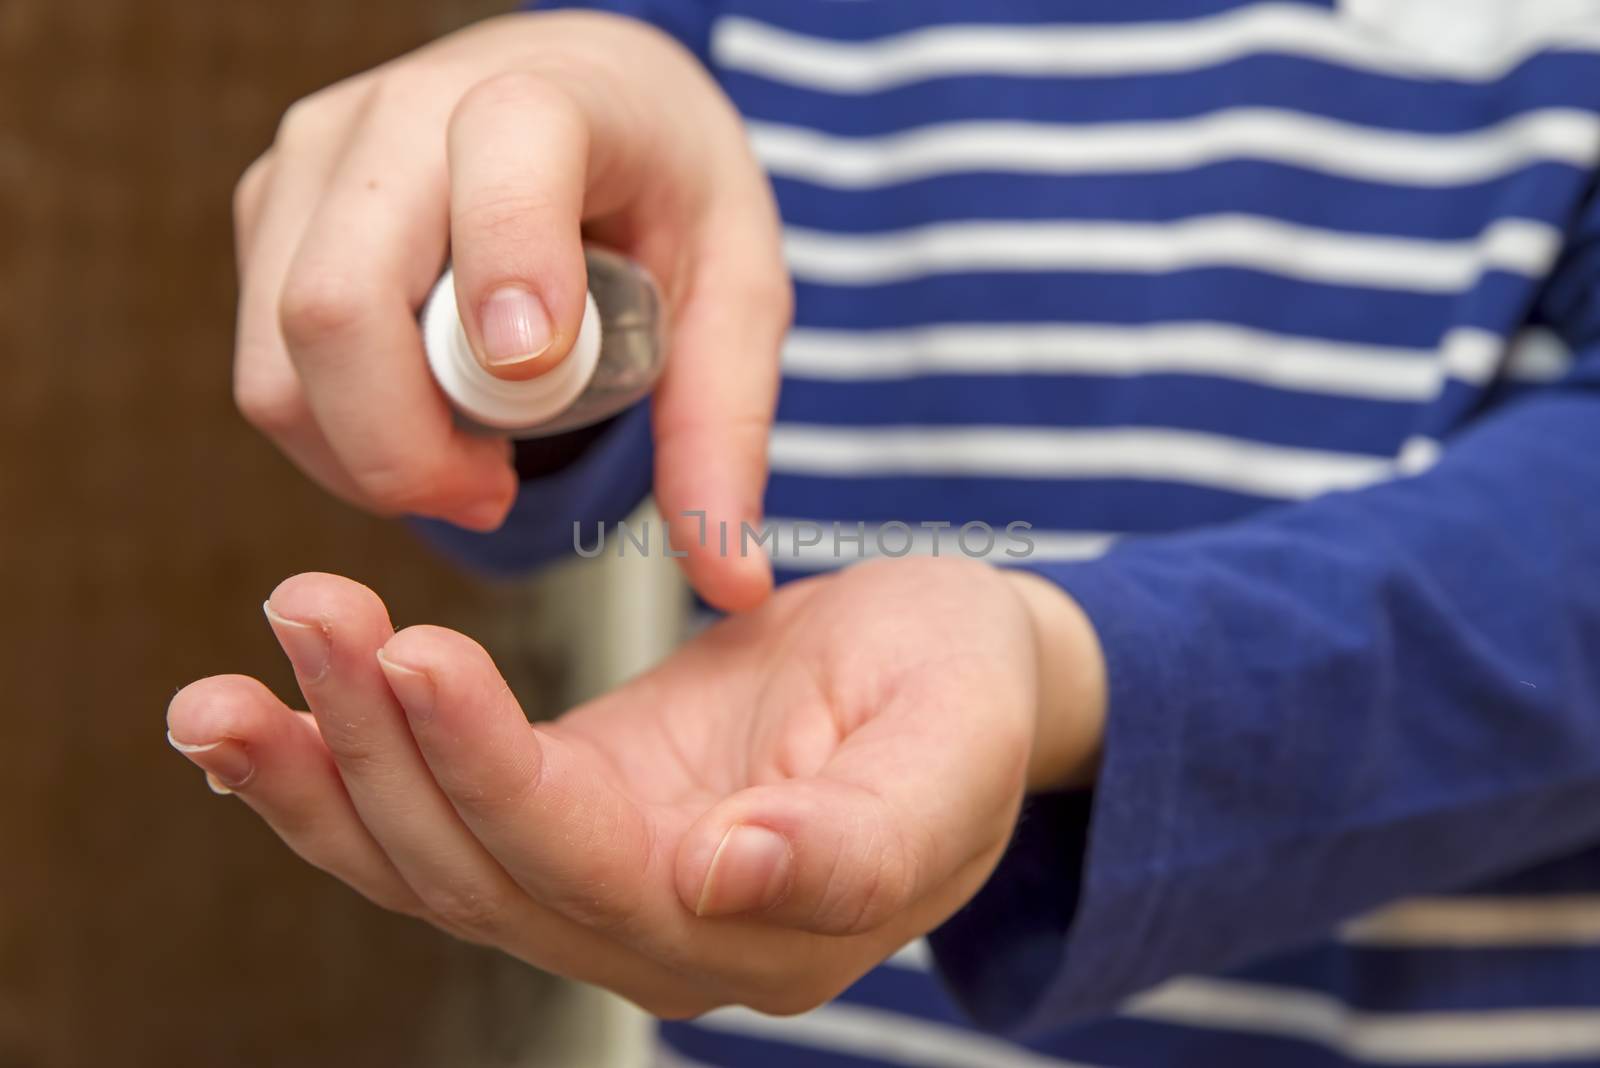 Kid wipes his hands with alcohol based spray, preventive measure against coronavirus